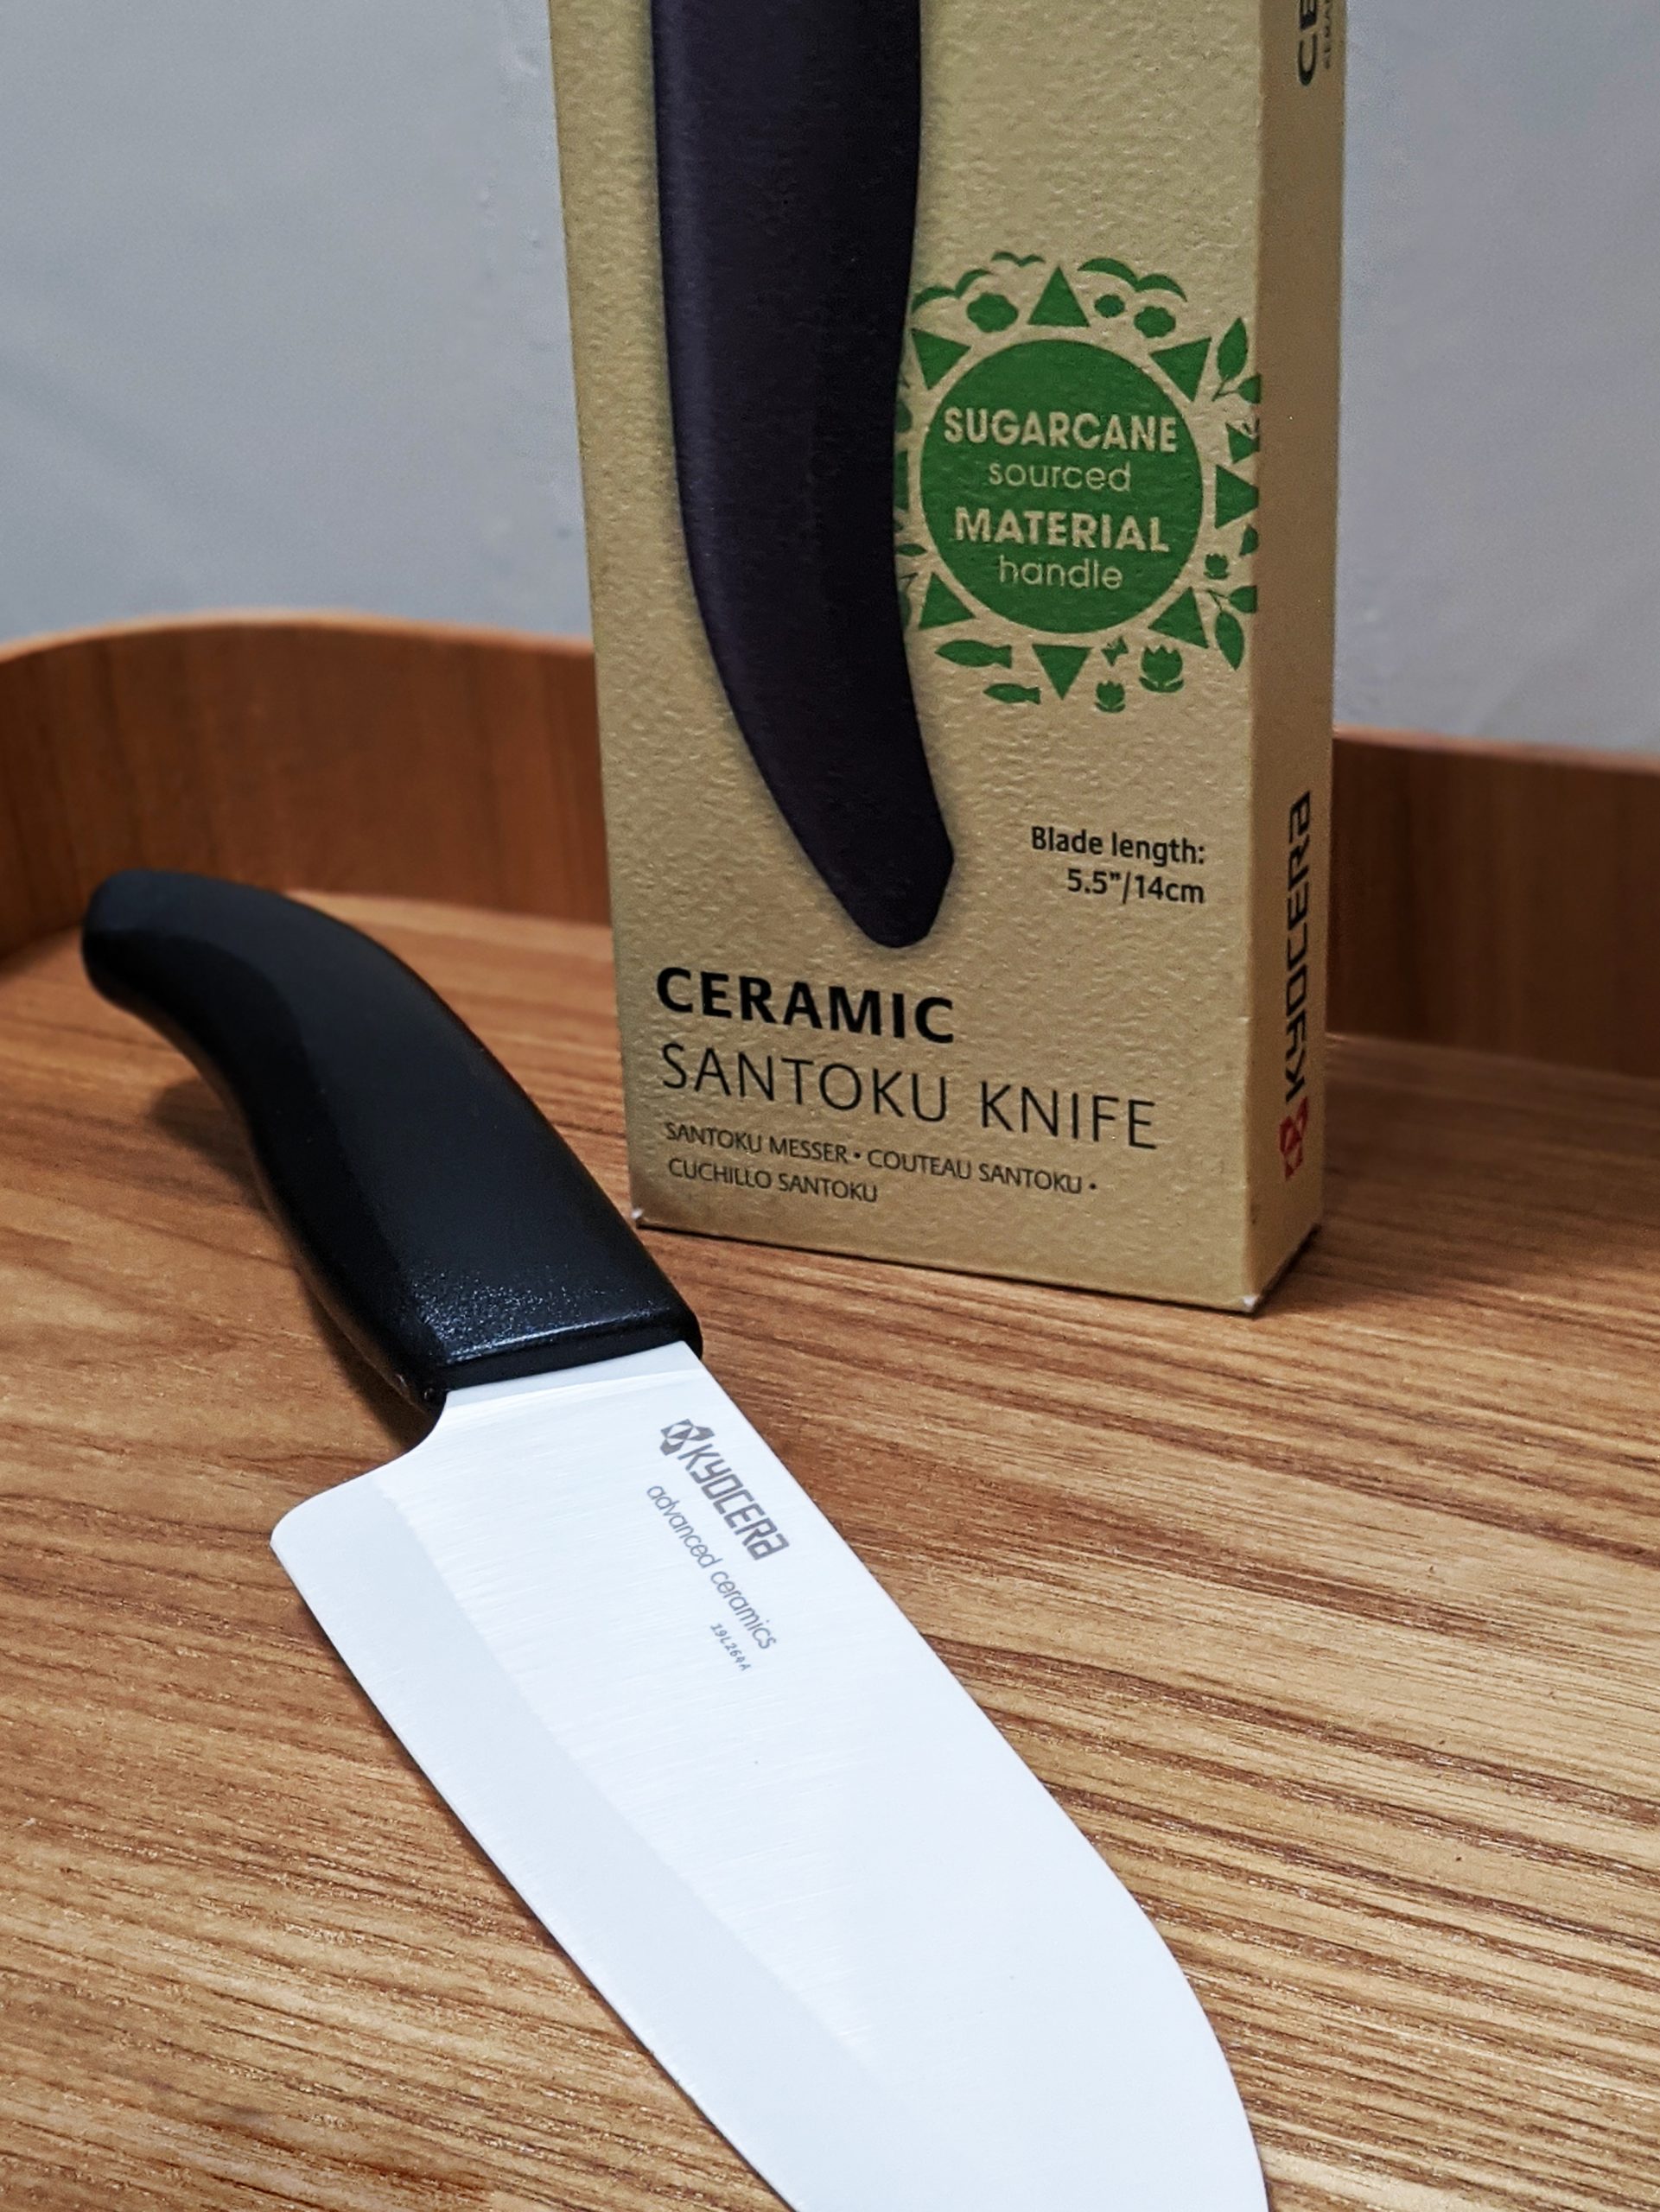 Kyocera launches Bio Series ceramic knives for eco-conscious cooks.